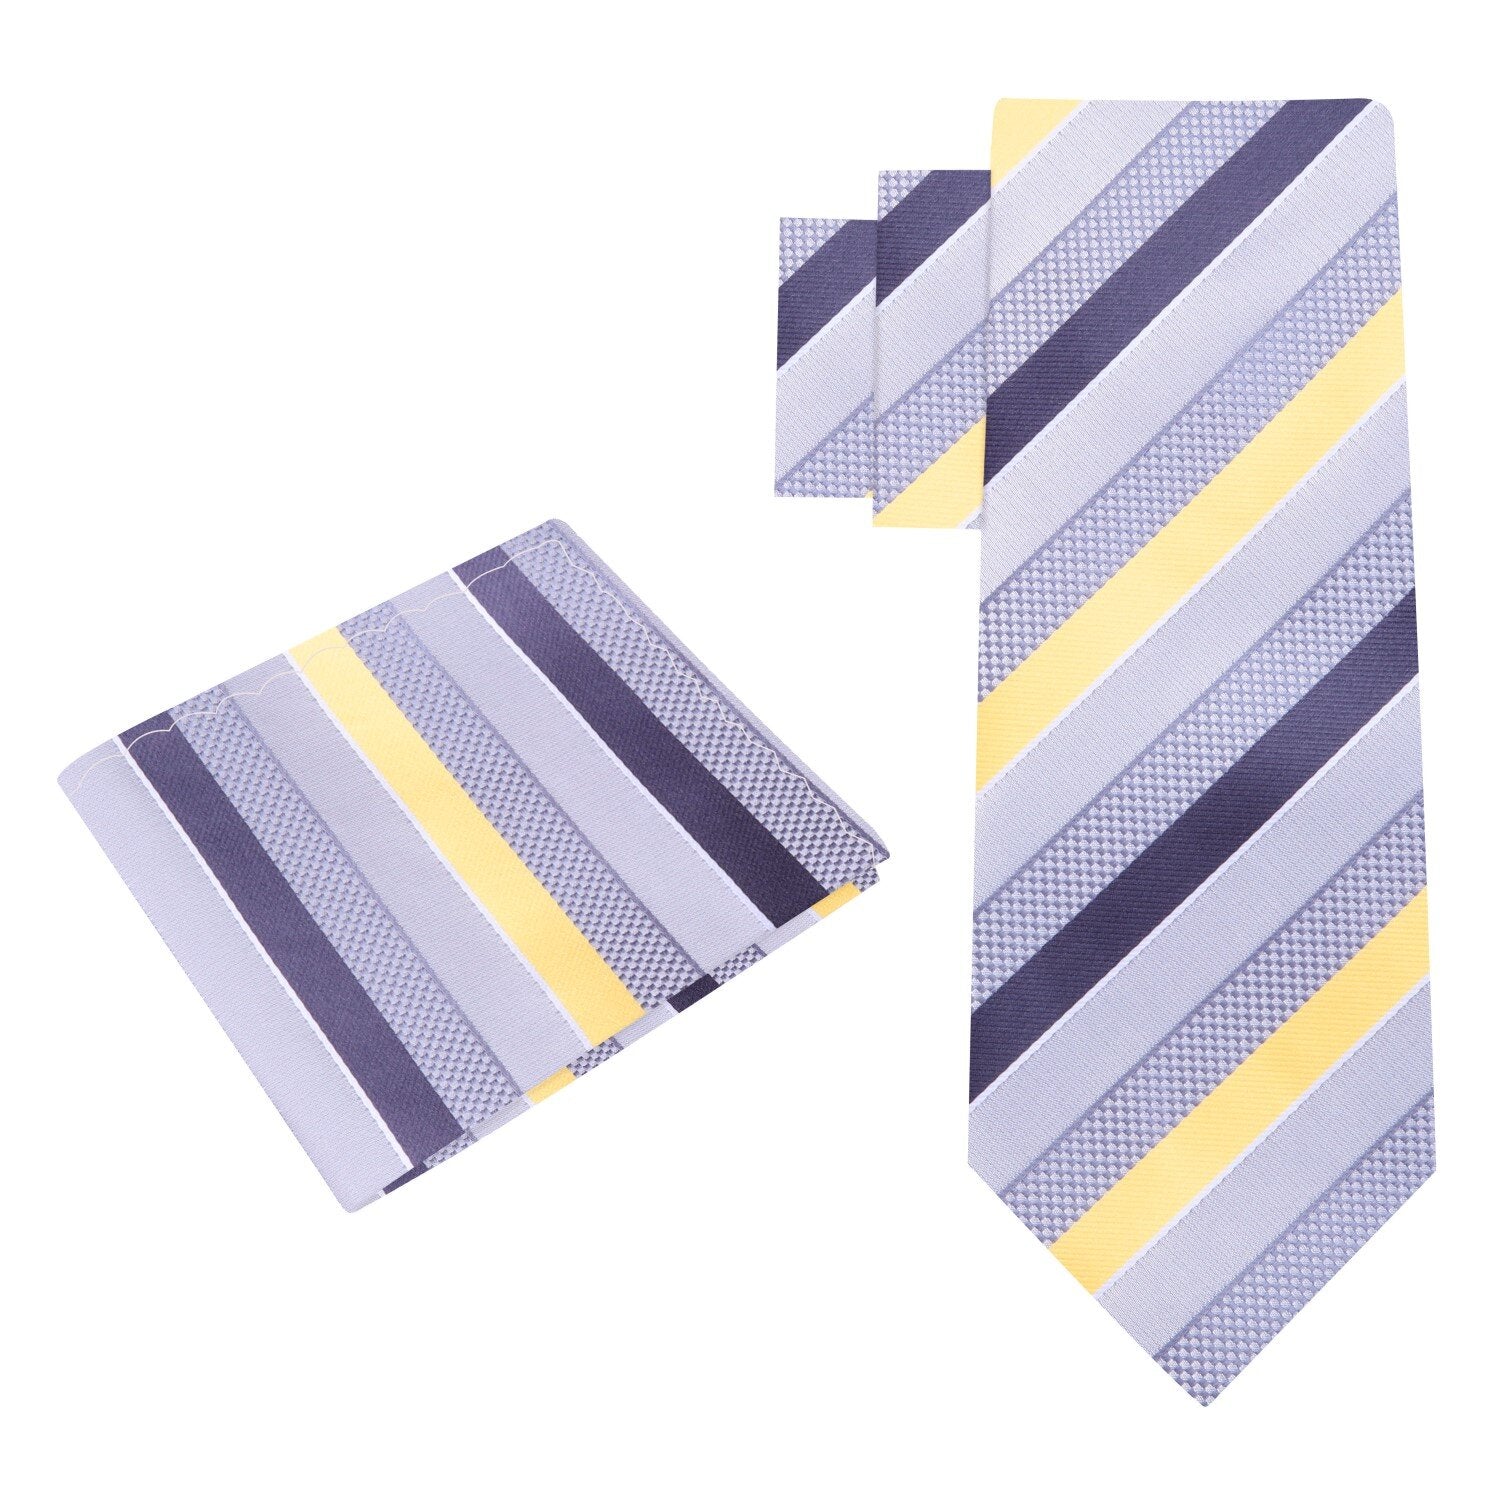 Alt View: Grey, Yellow Stripe Tie and Pocket Square